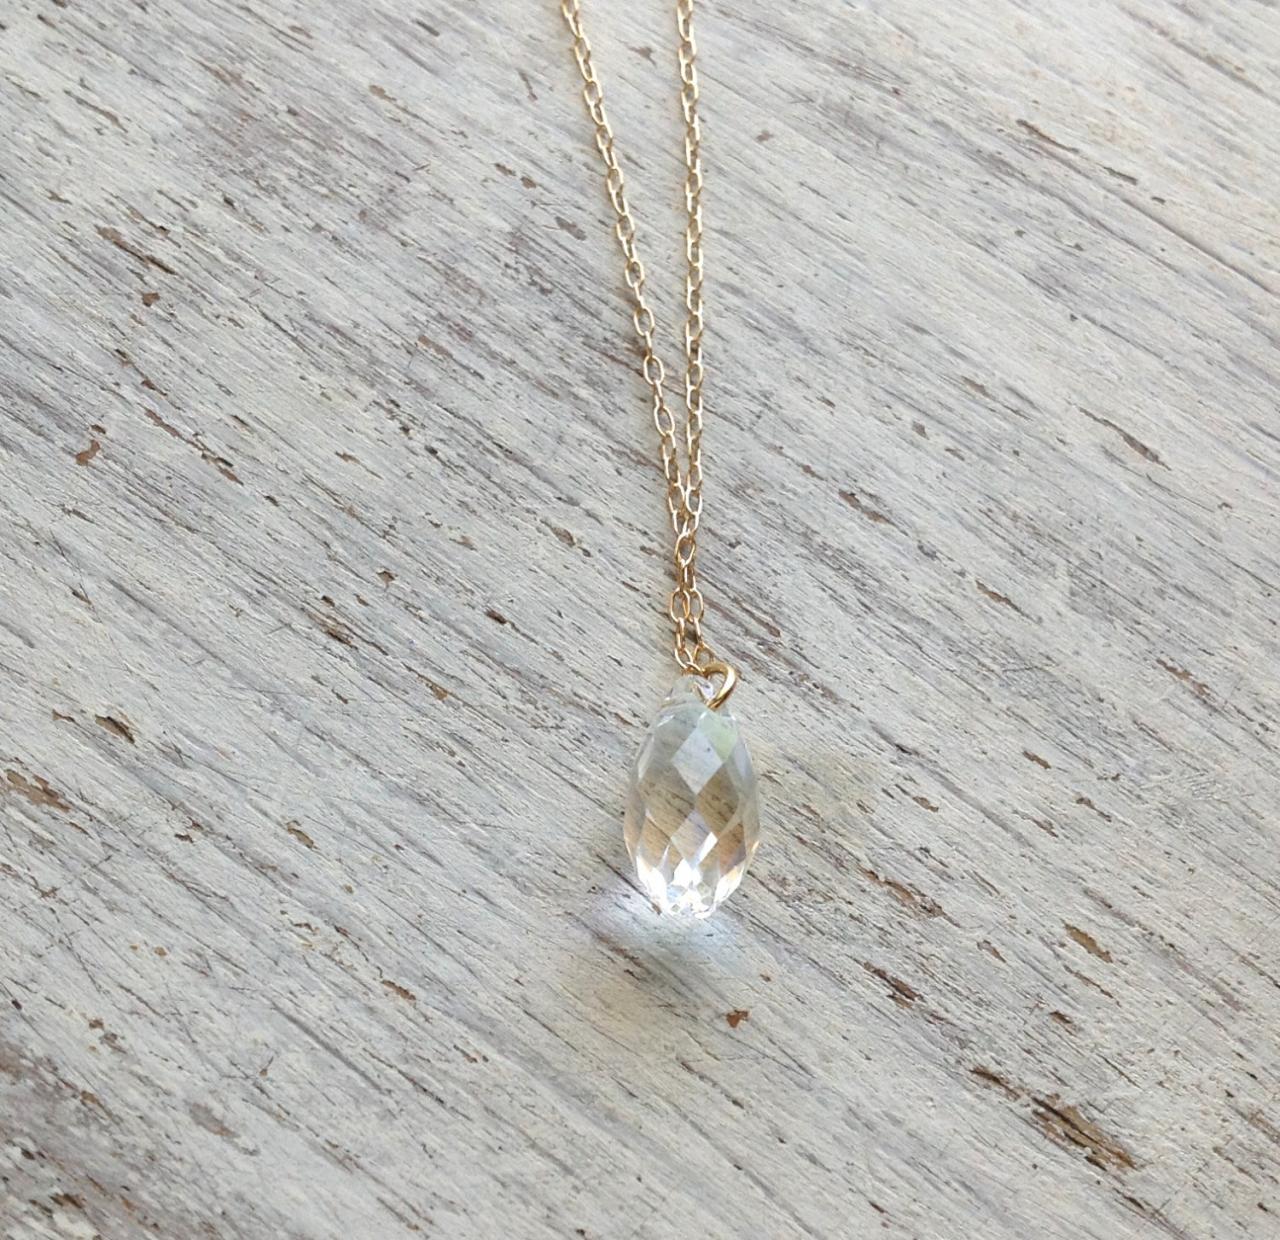 SALE-gold necklace, gold necklace with clear teardrop bead, gift for her, clear swarovsky bead, tiny gold necklace, wedding - 579